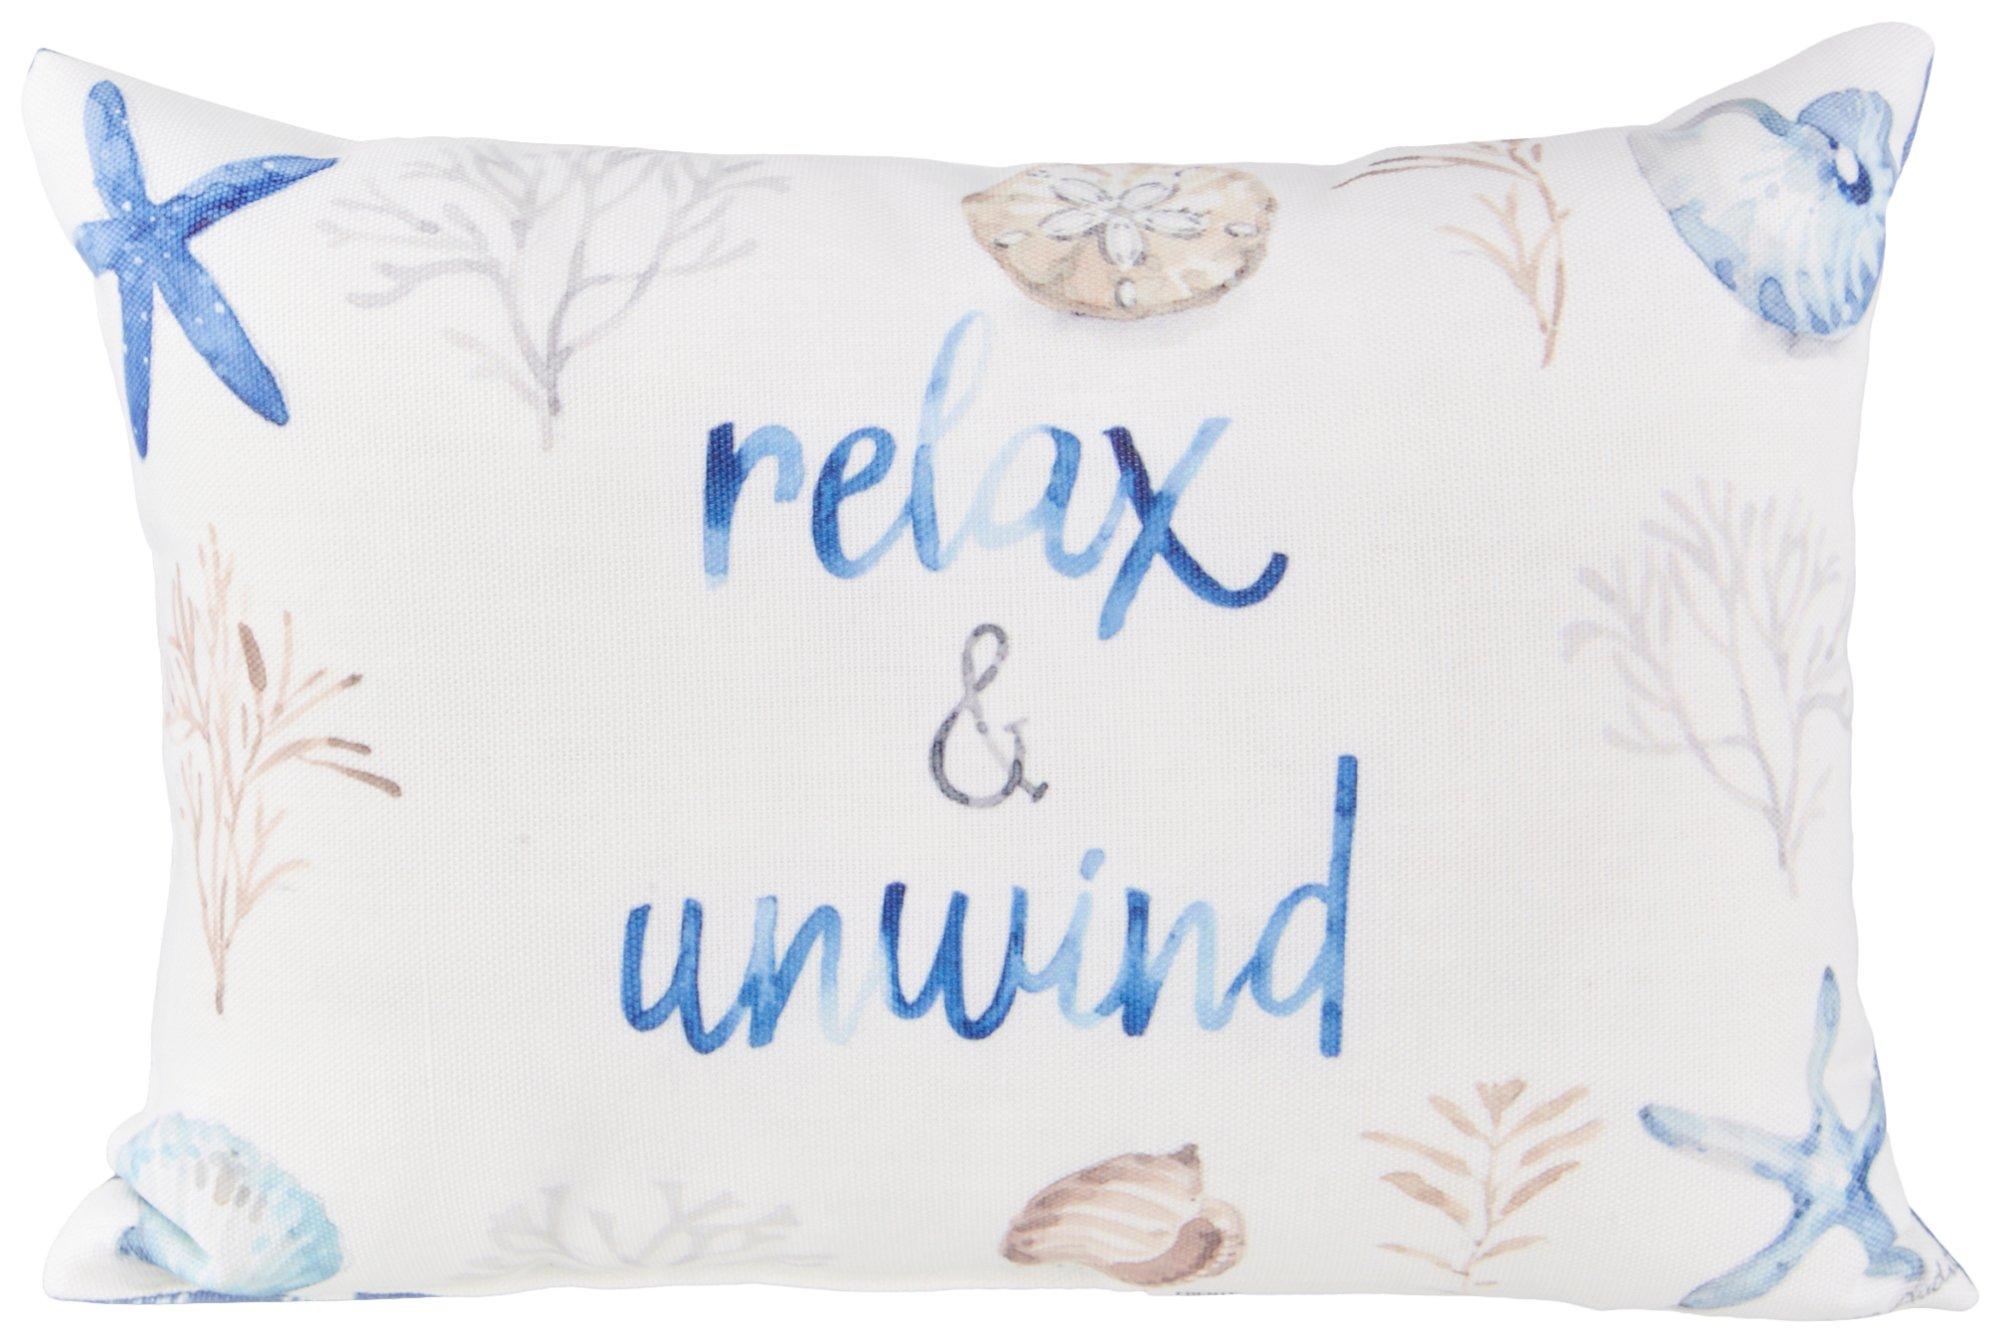 8x12 Relax and Unwind Outdoor Pillow